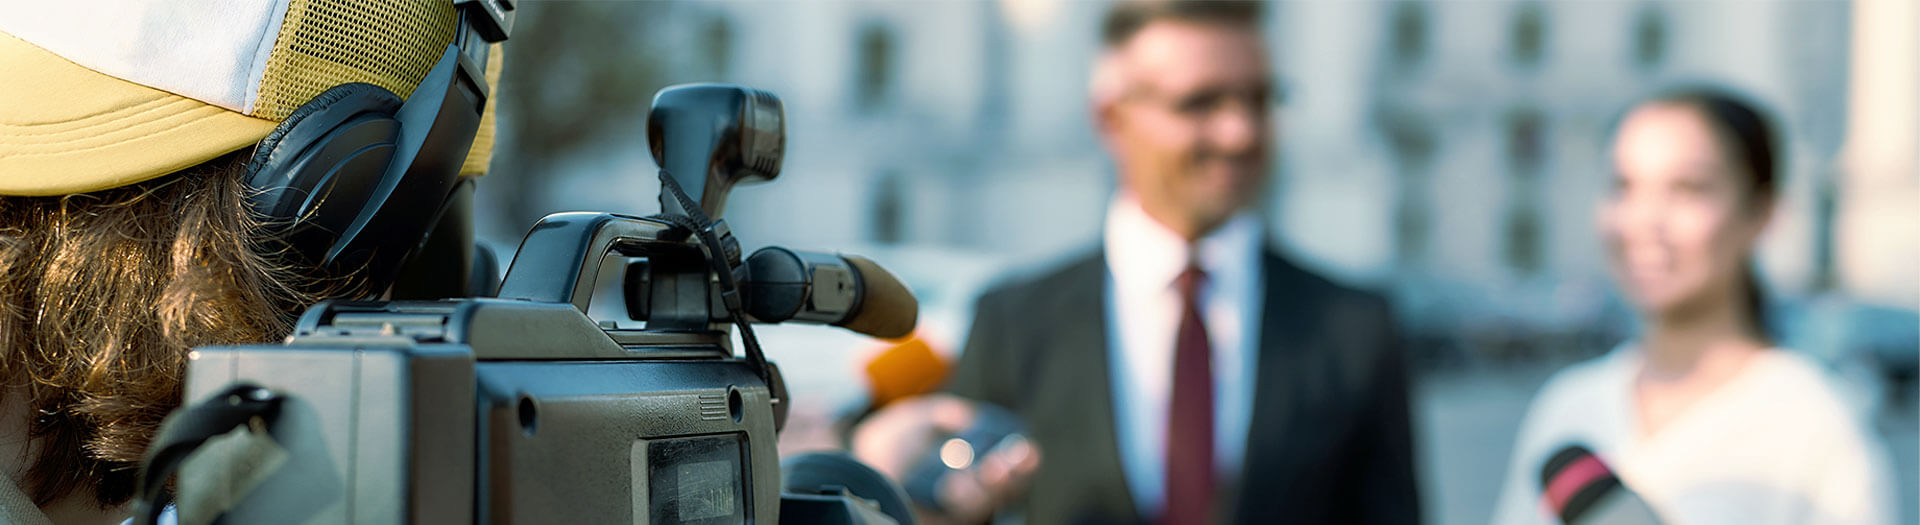 Image of journalist conducting an on-camera interview 